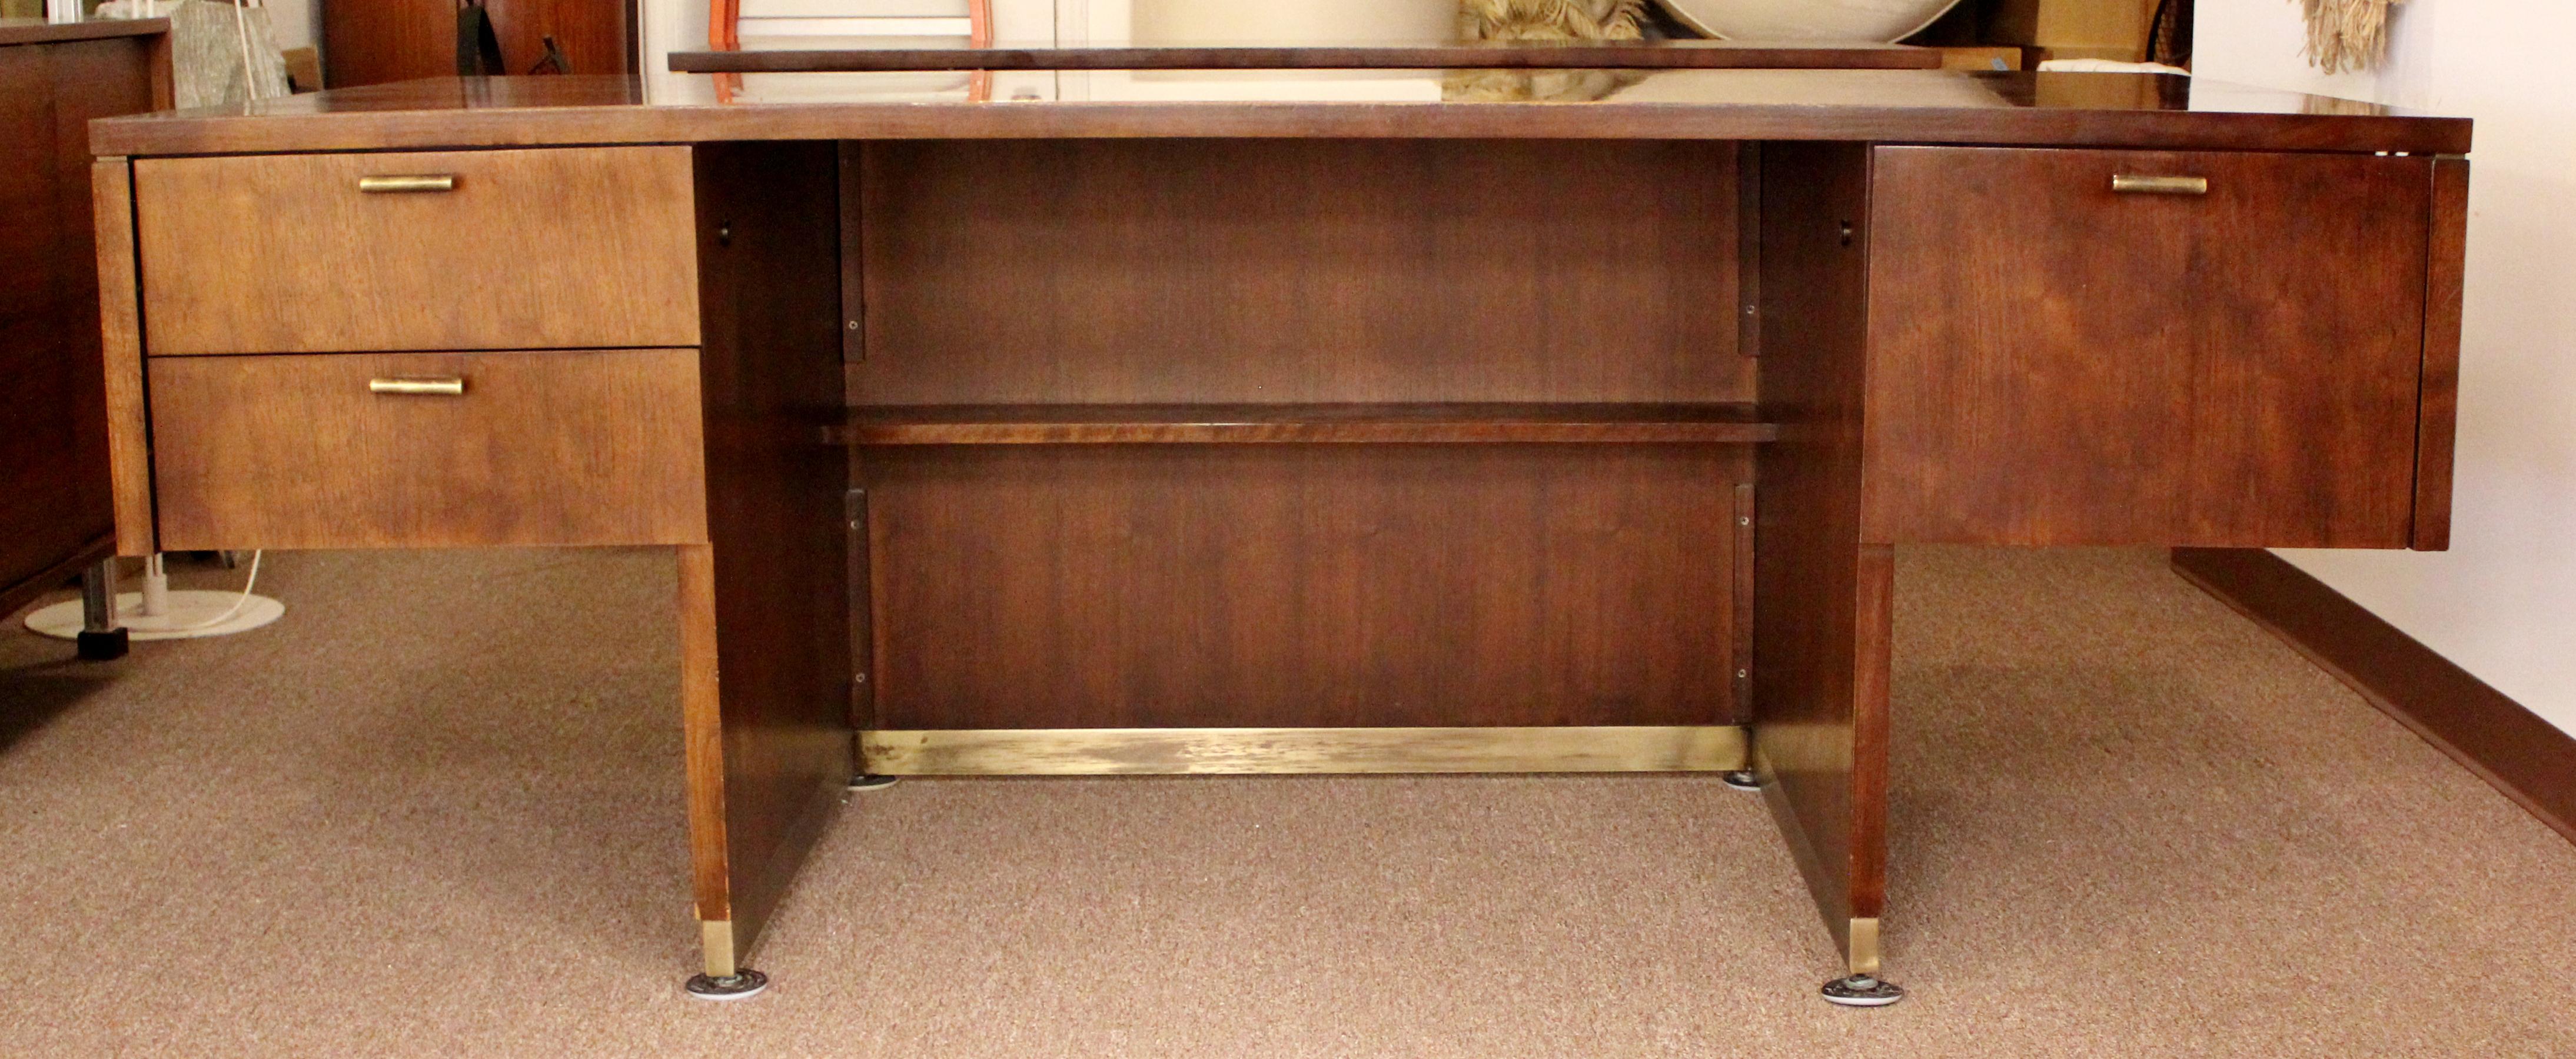 For your consideration is a magnificent, executive cantilever desk, made by Myrtle desk, with three drawers and brass accents, circa 1960s walnut body is an open pedestal base with recessed shelf and brass inlay. The 3 drawers have pulls that are